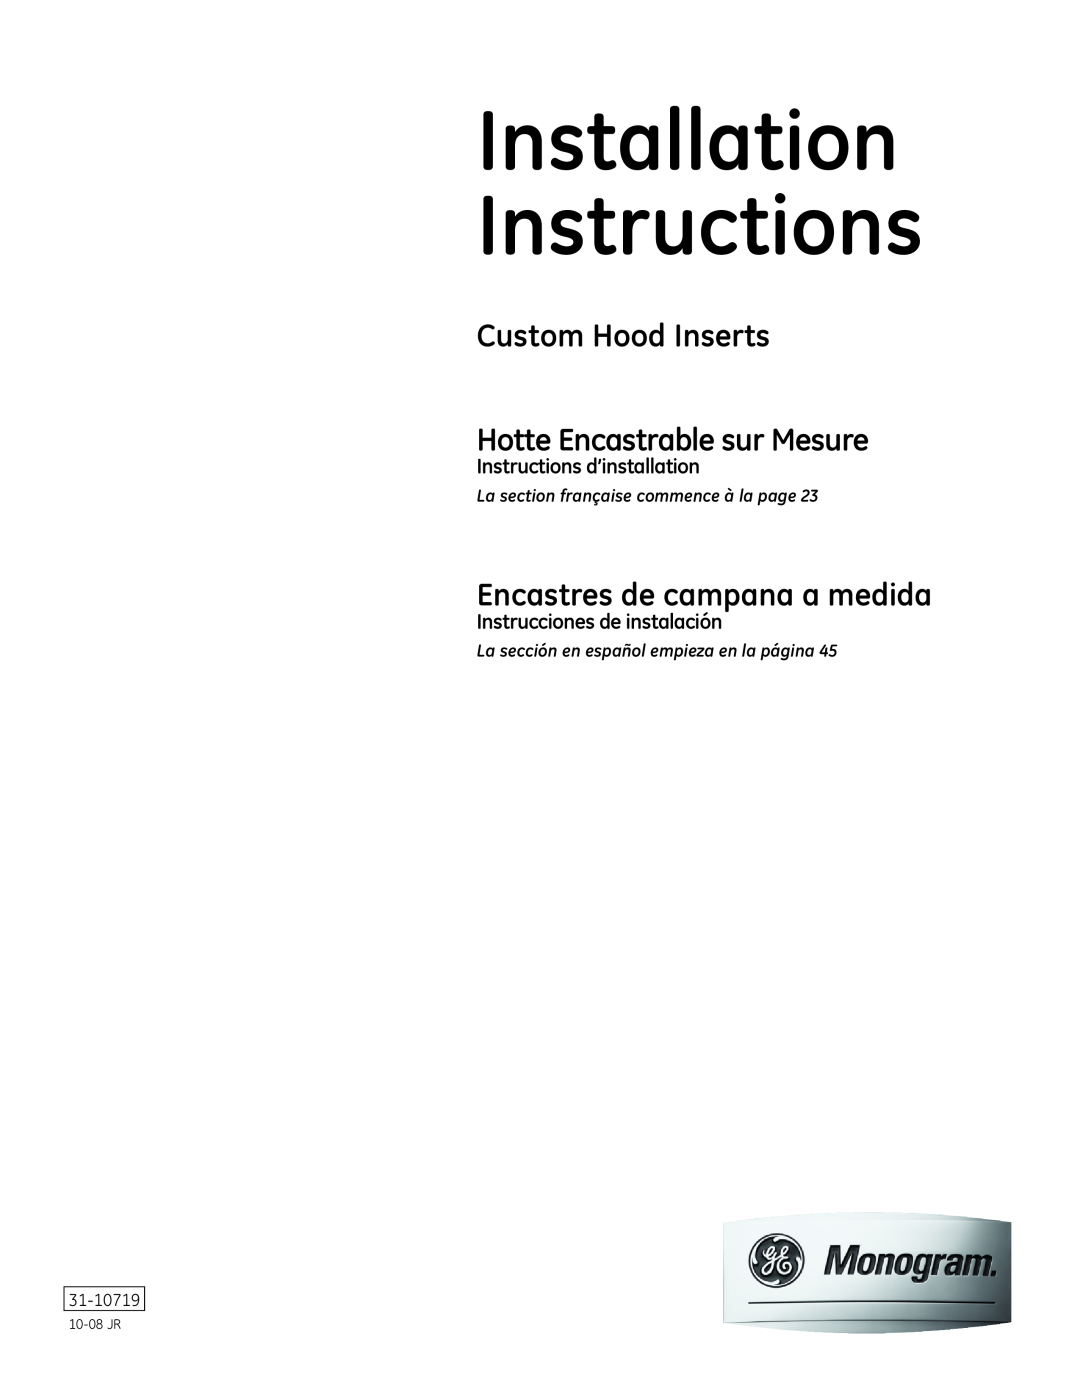 GE ZVC48 installation instructions Instructions d’installation, Instrucciones de instalación, Installation Instructions 